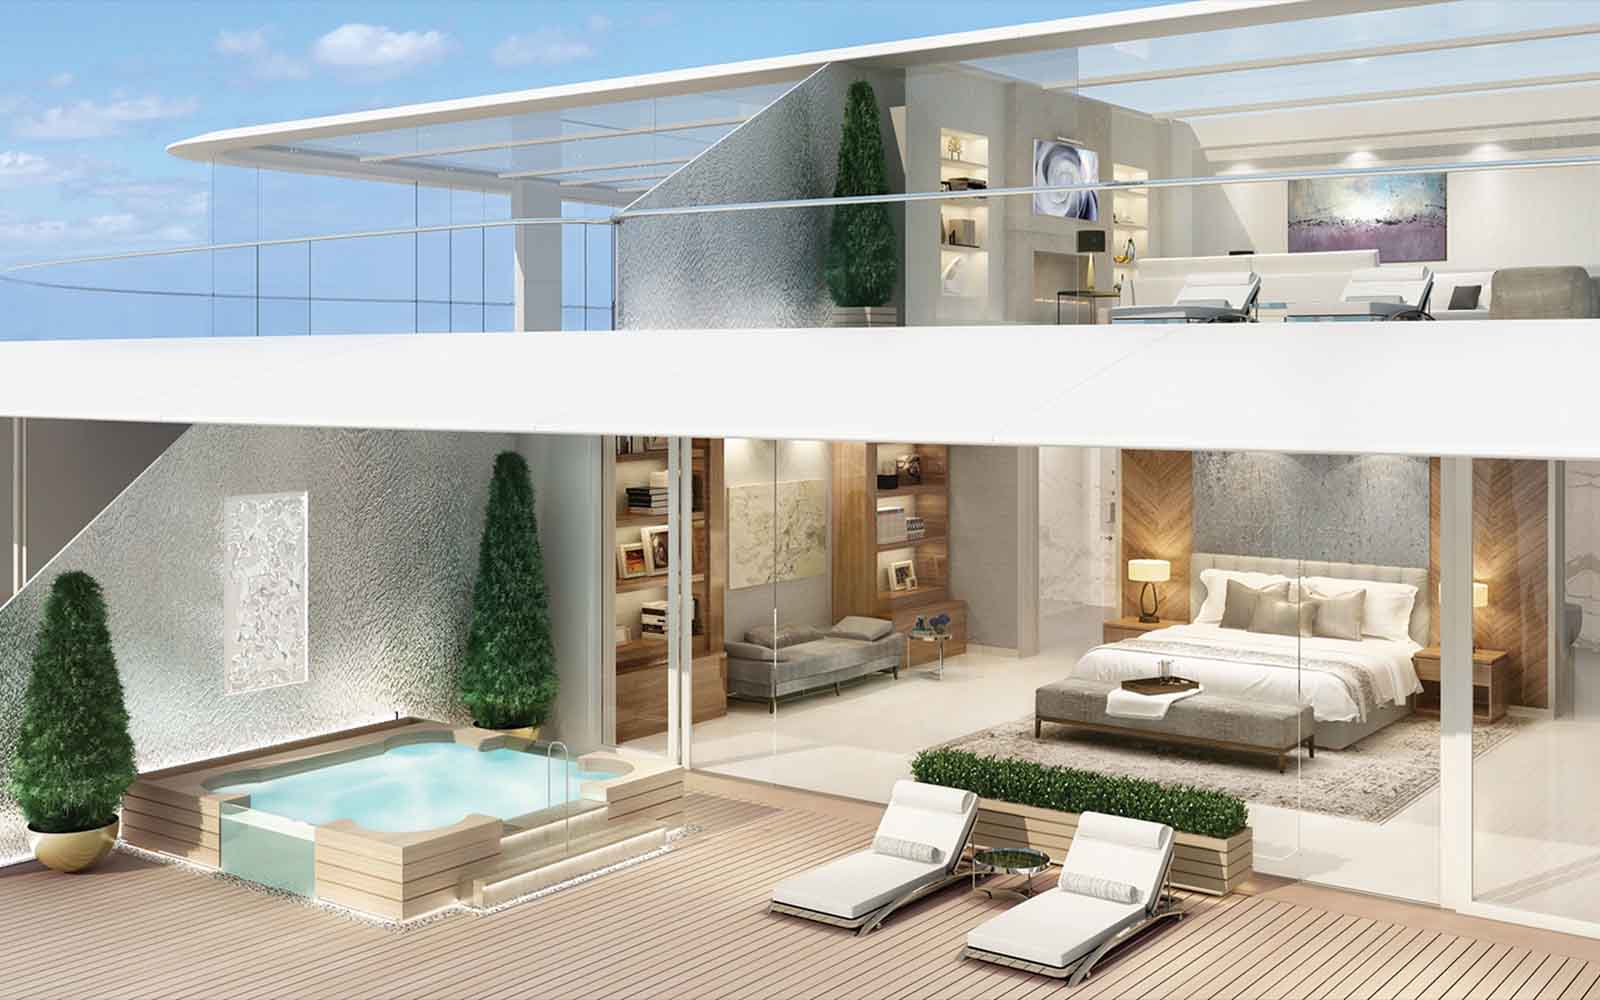 Njord superiate residencial - boat shopping